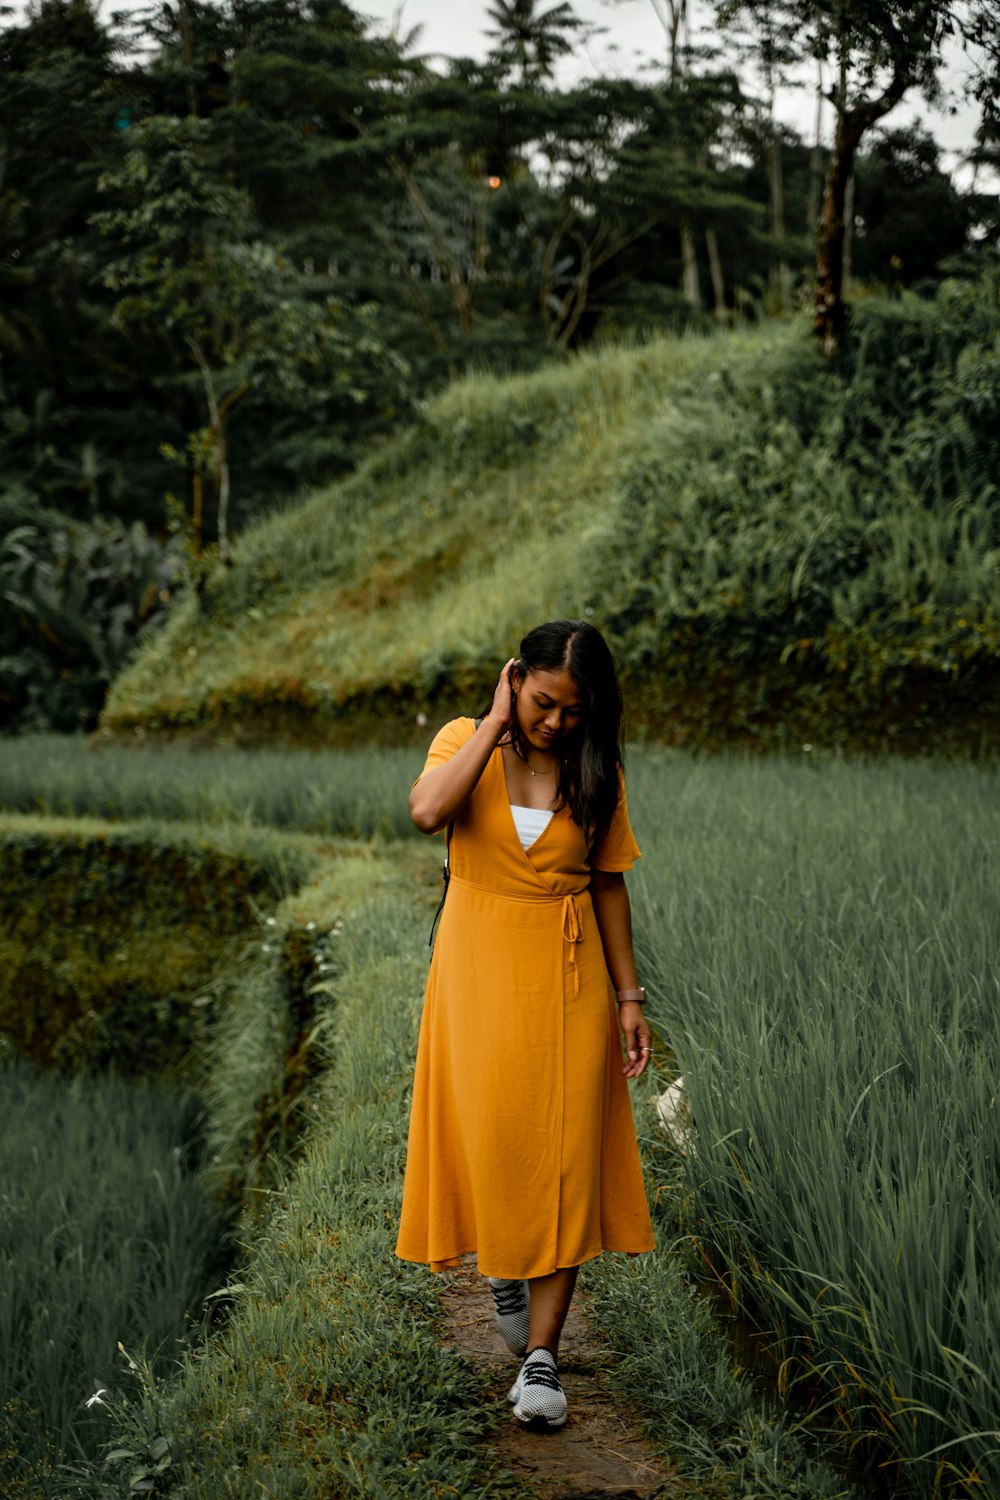 woman in orange dress standing on green grass field during daytime